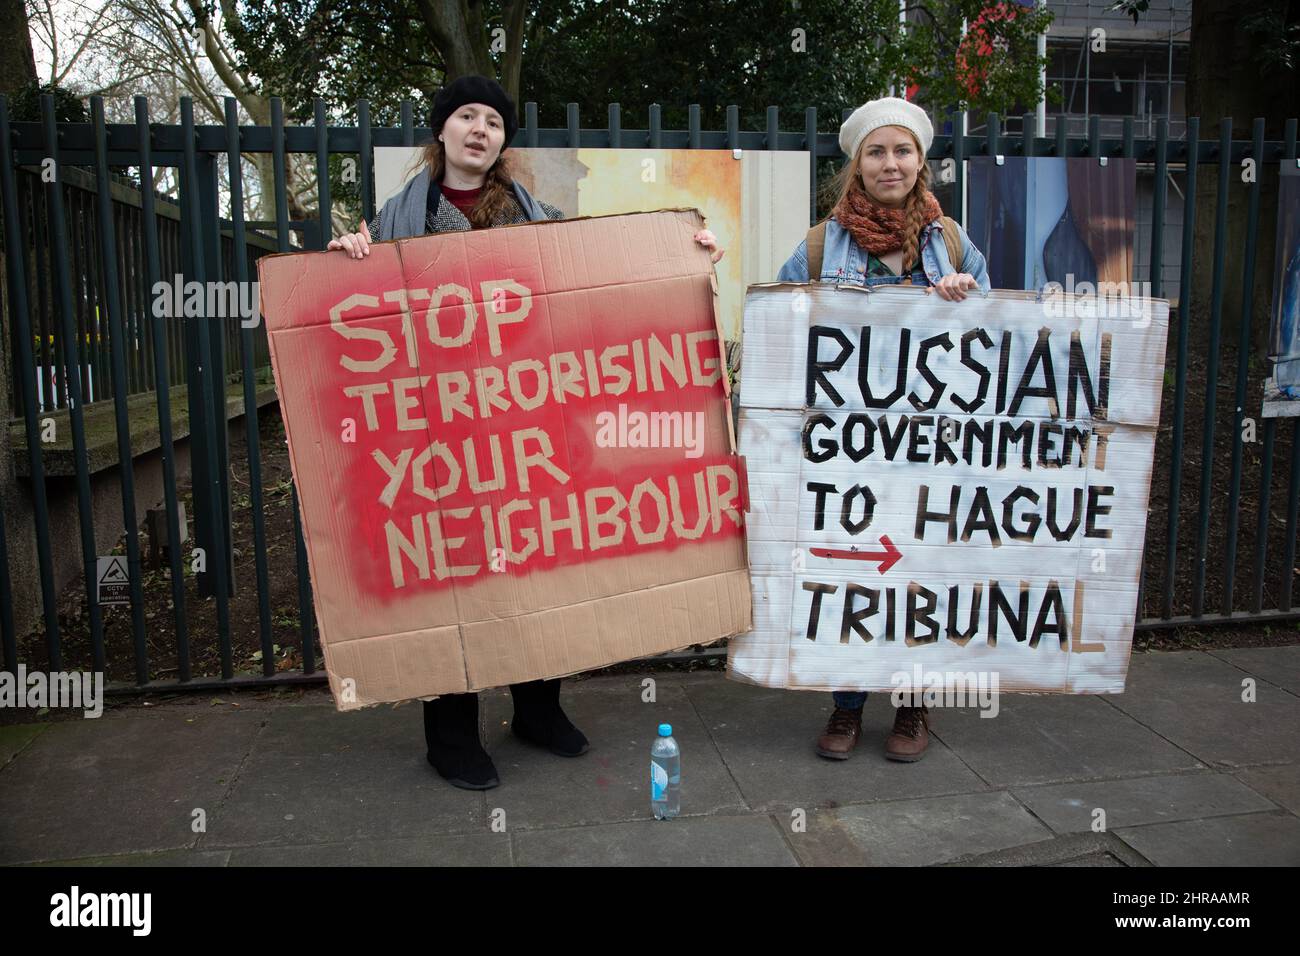 London, UK. 25th Feb, 2022. Claudia from Poland and Elena from Lithuania hold up protest signs outside the Russian Embassy, protesting against Russia's recent attack on the Ukraine Credit: Kiki Streitberger/Alamy Live News Credit: Kiki Streitberger/Alamy Live News Stock Photo